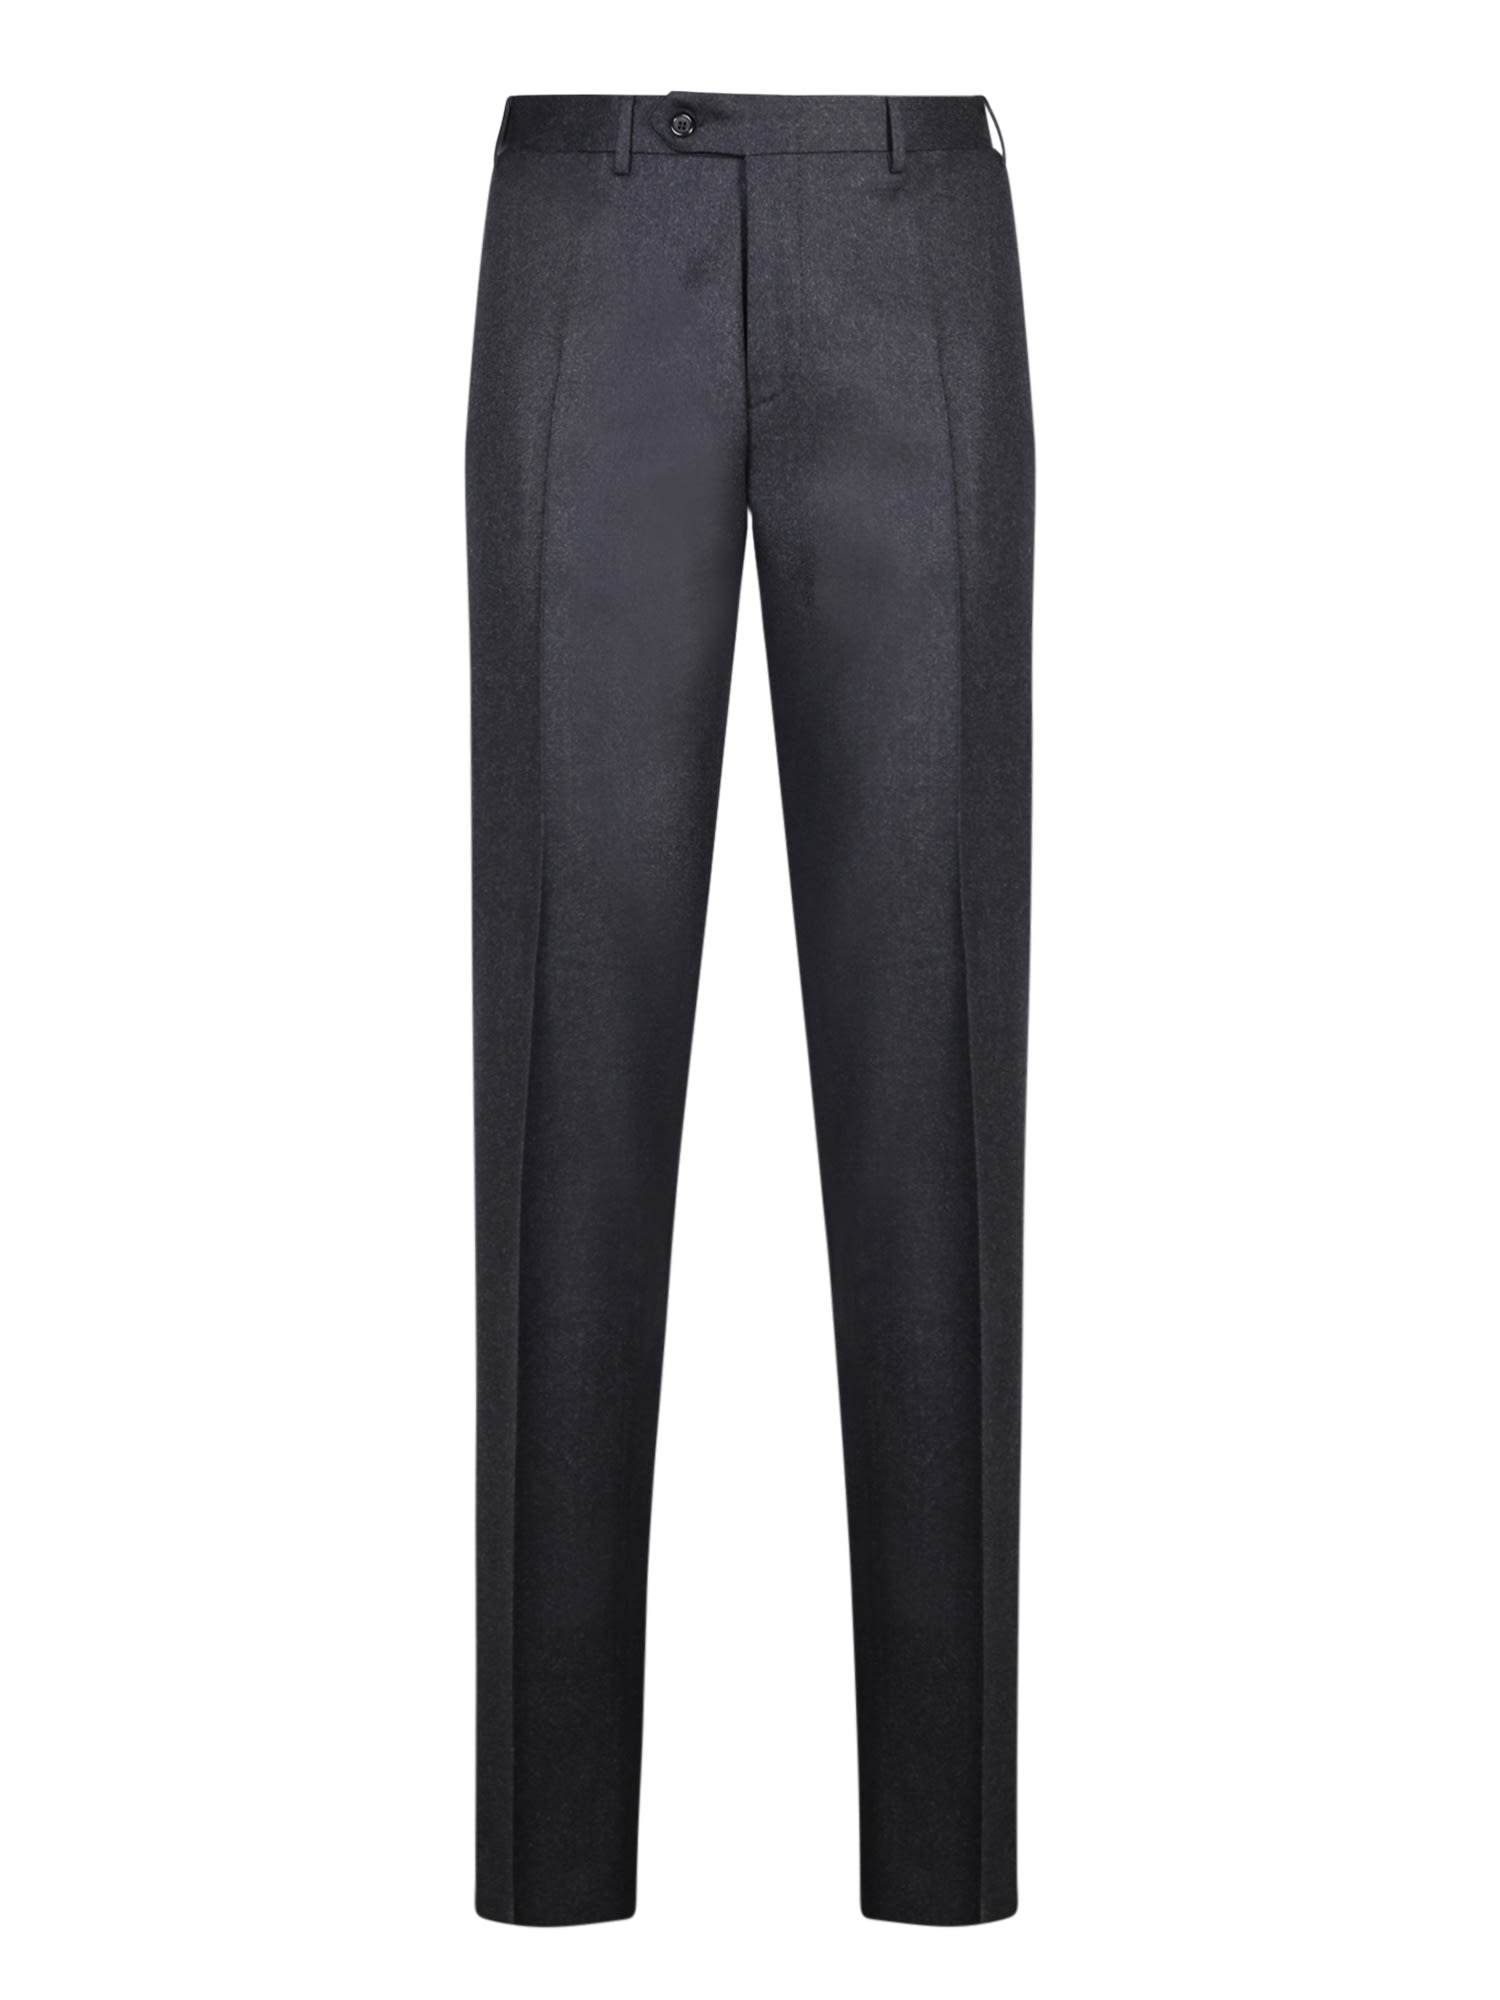 CANALI TAPERED LEG GREY TROUSERS